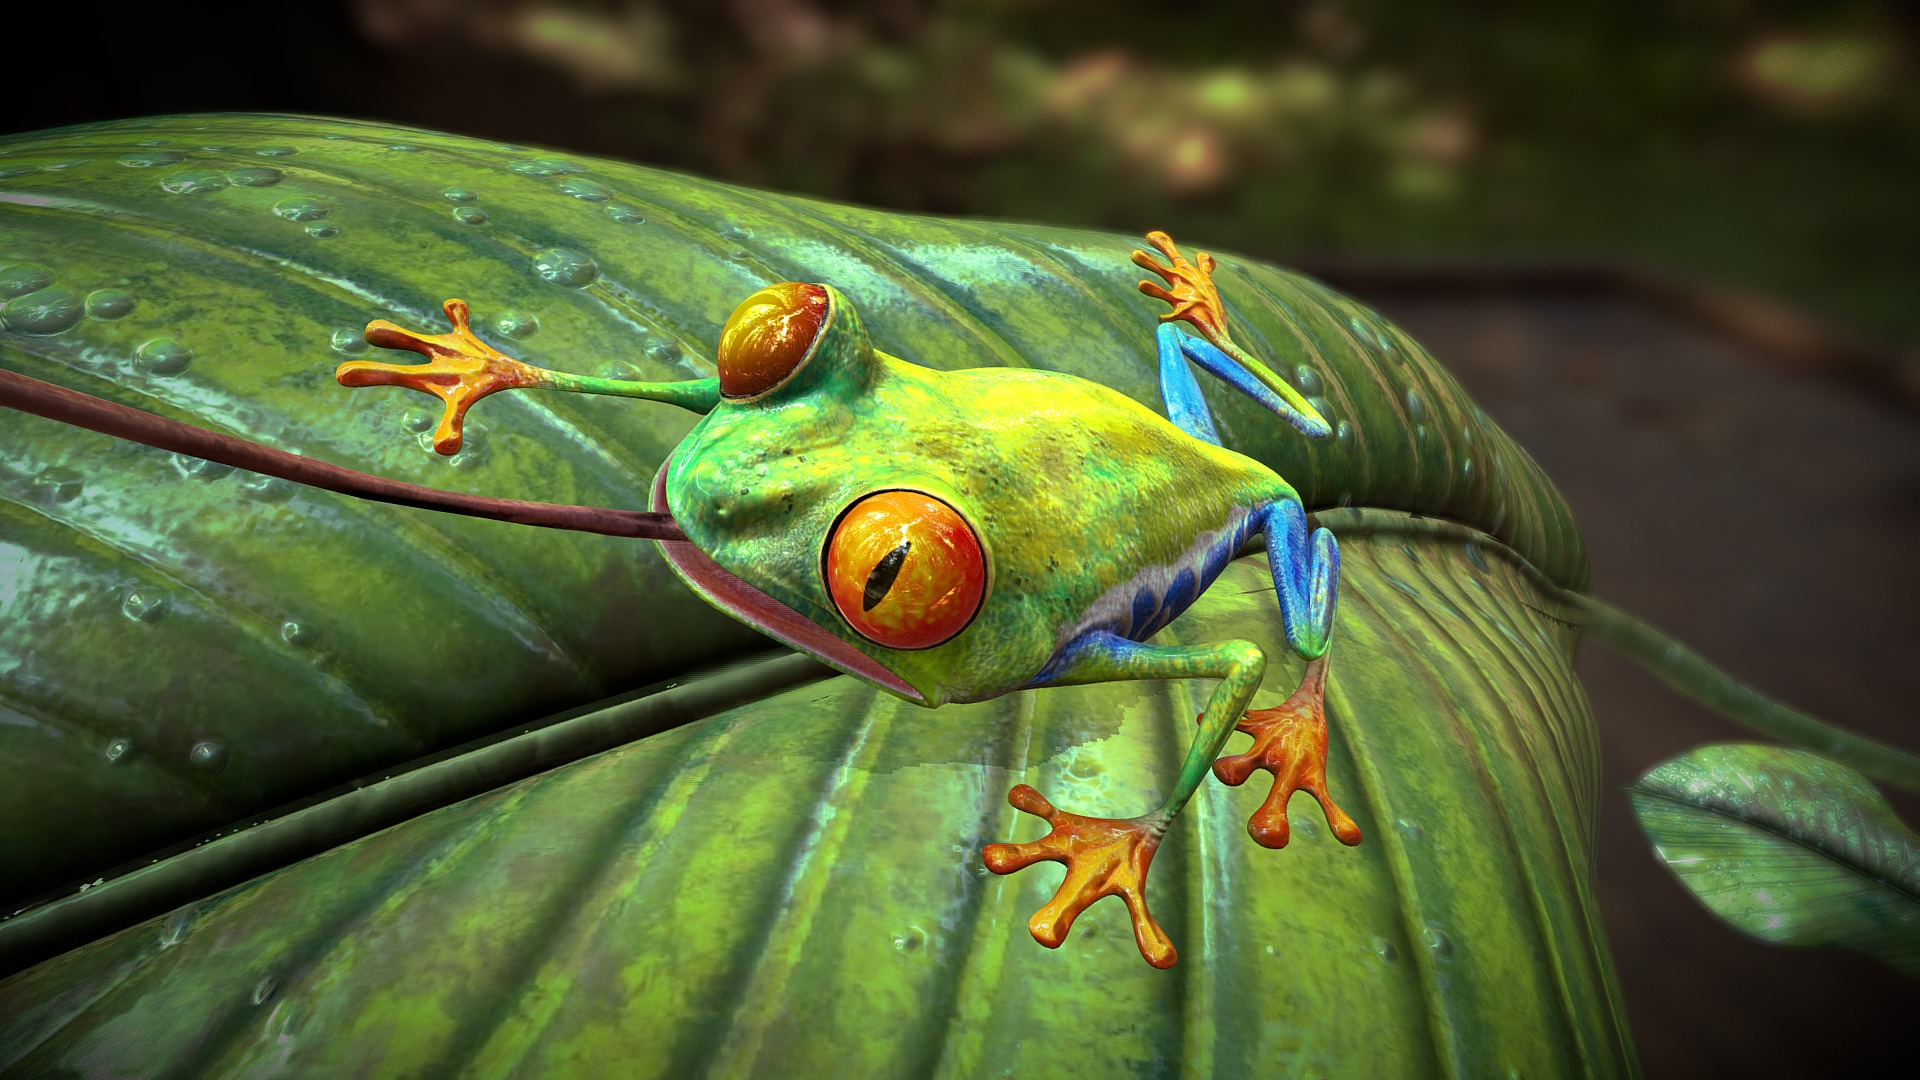 3D model Green Tree Frog - This is a 3D model of the Green Tree Frog. The 3D model is about a green and orange frog on a leaf.